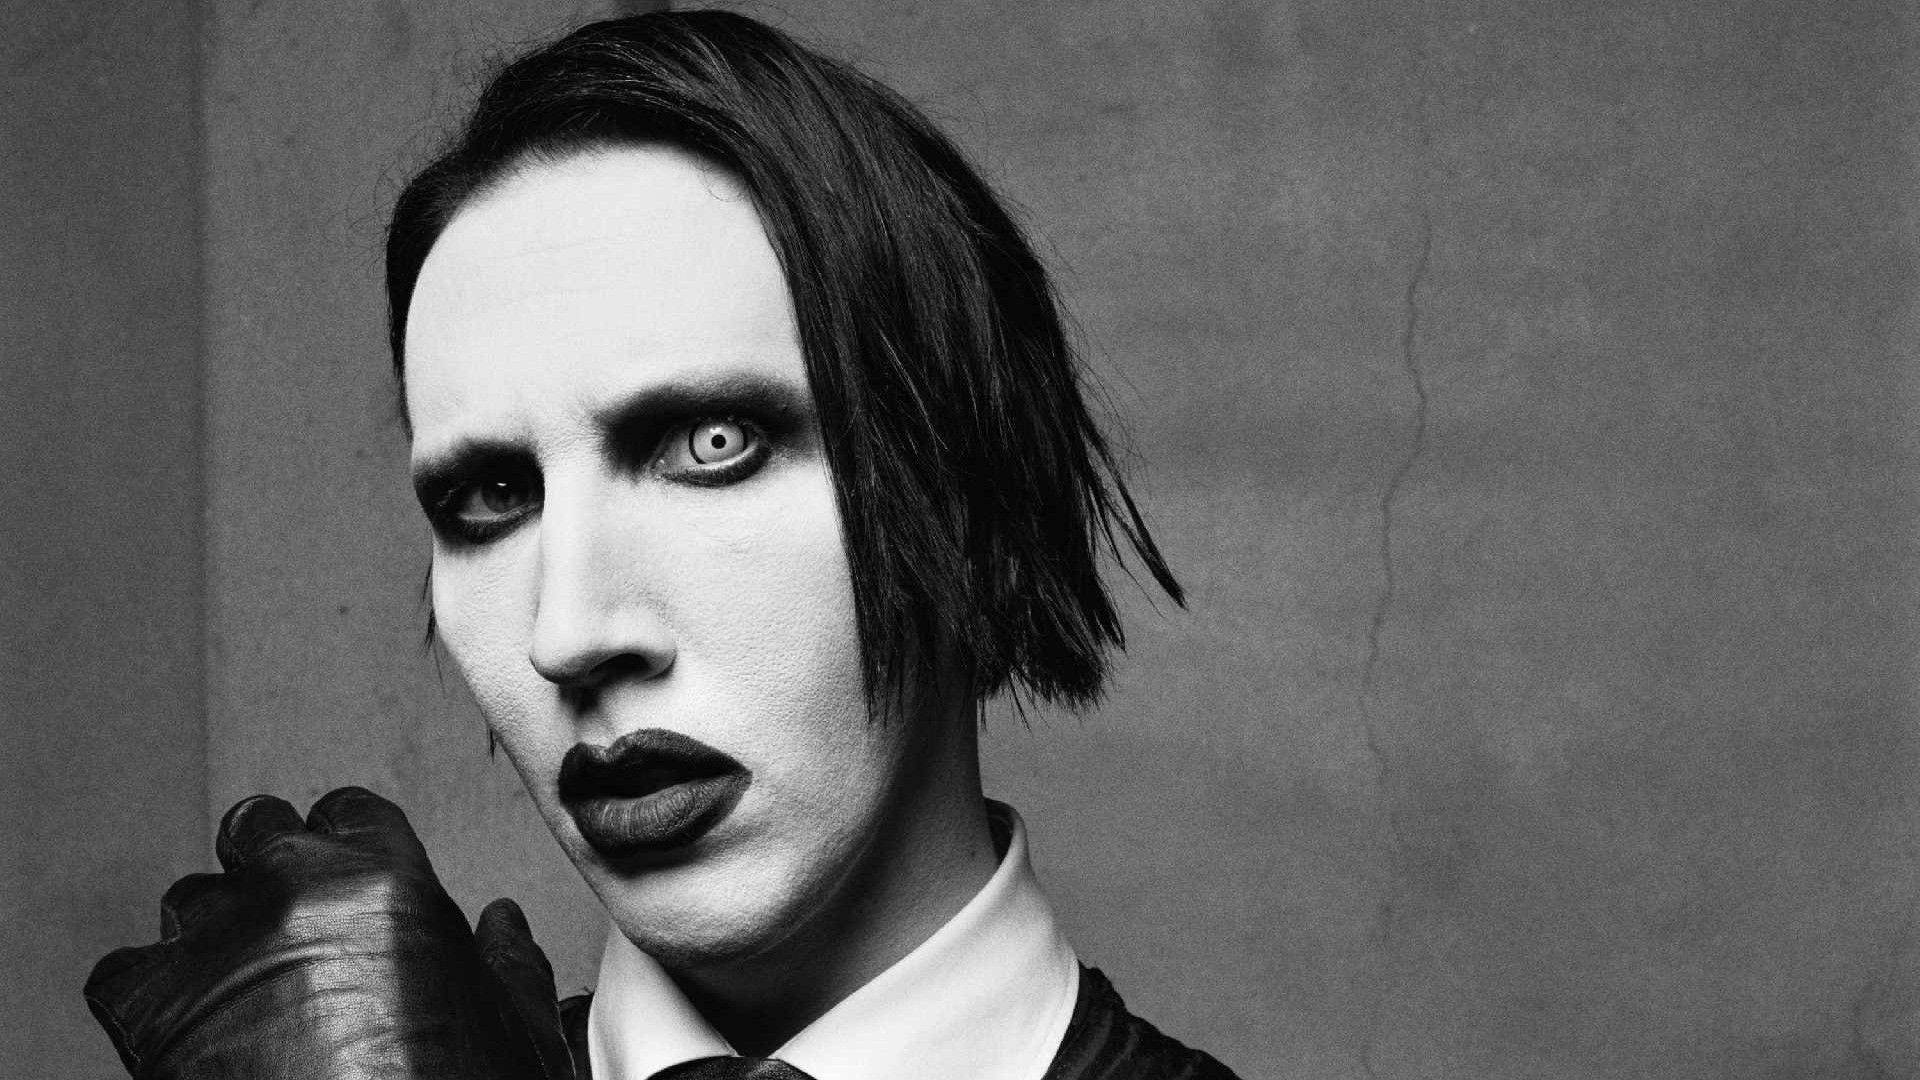 Marilyn Manson Wallpaper, Picture, Image